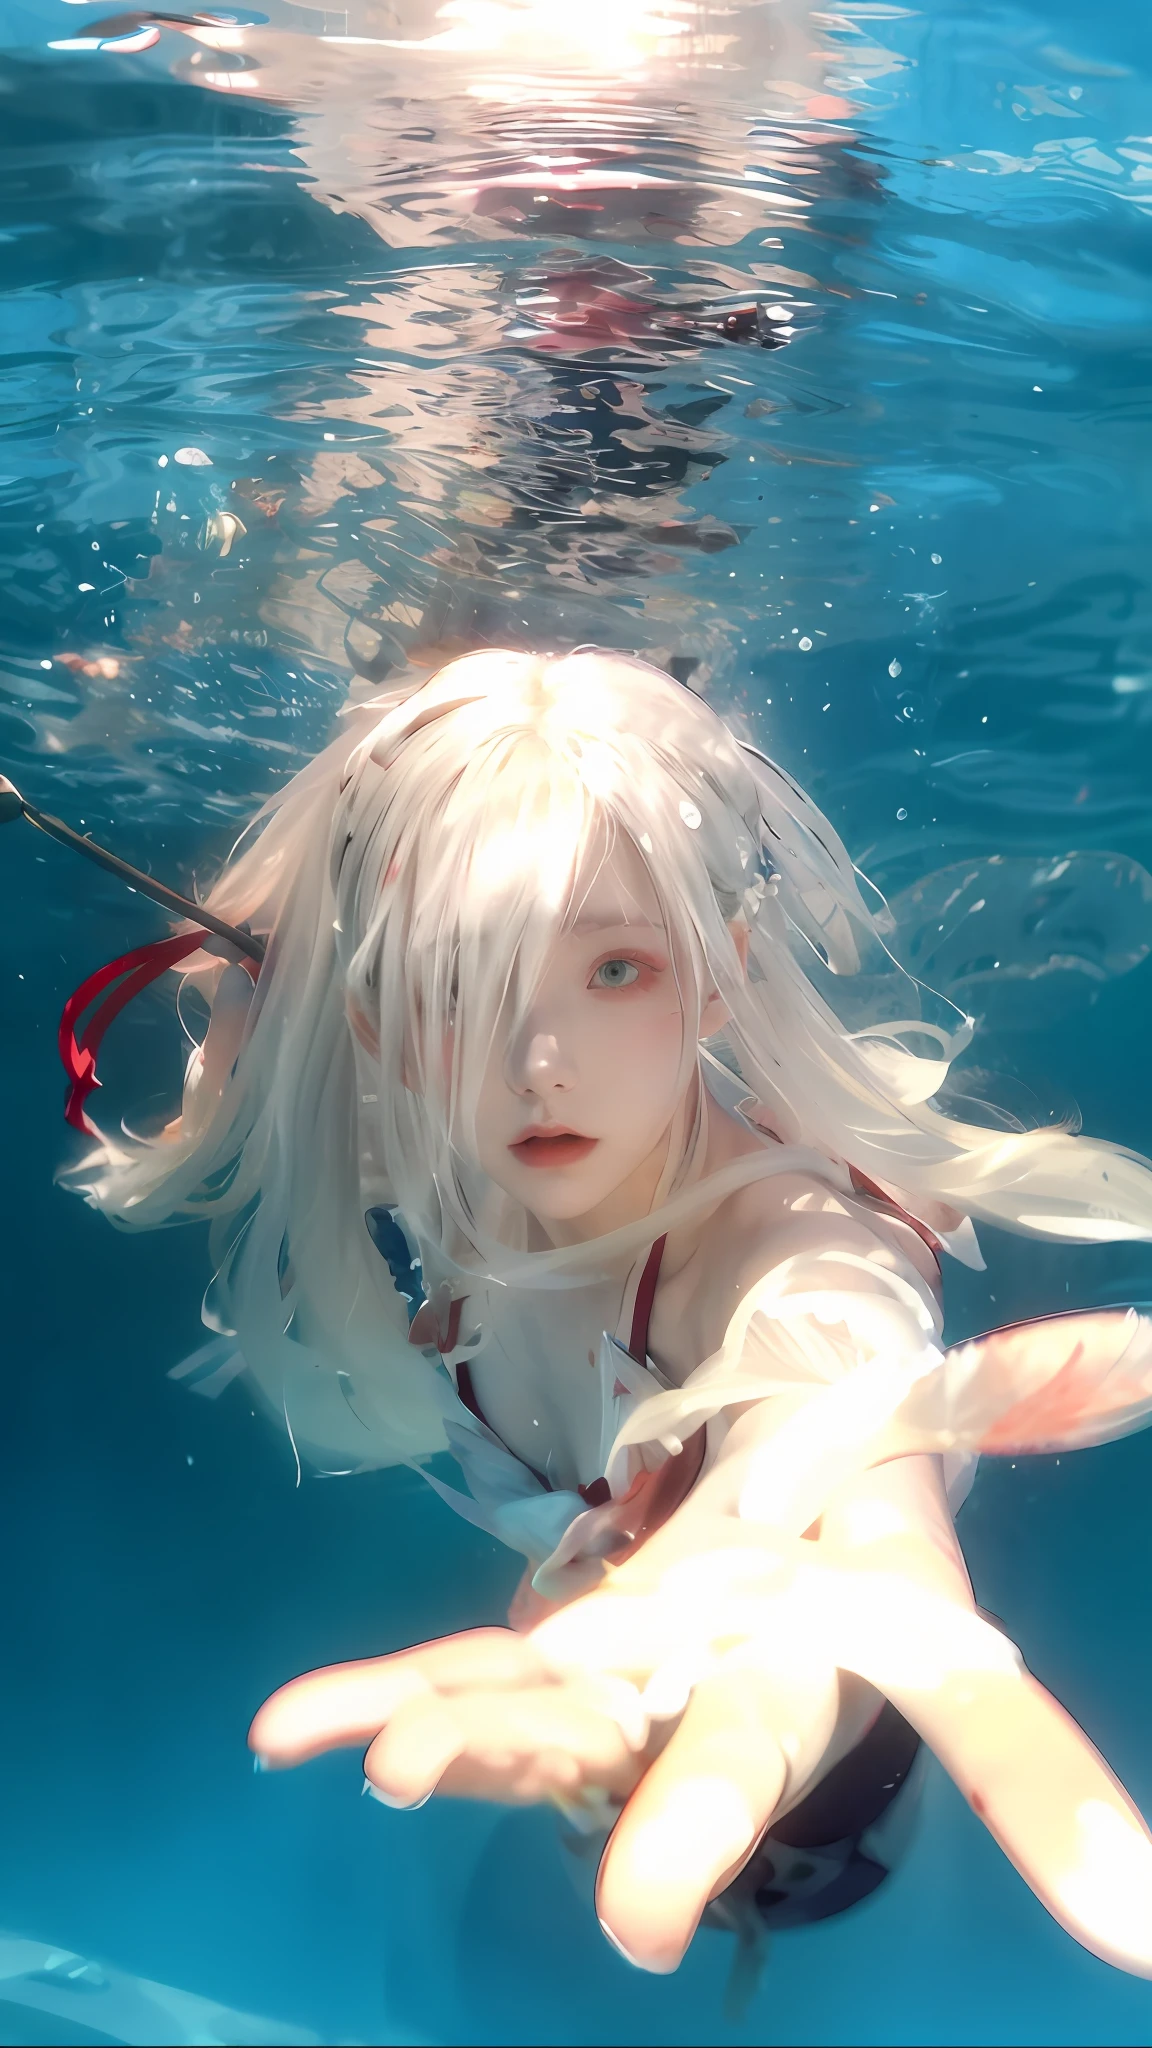 Blonde woman wearing white swimsuit，Holding a red umbrella, white hair floating in air, Tifa Lockhart with white hair, Flowing white hair, Guviz-style artwork, Guviz, underwater photo, Anime style mixed with Fujifilm, Anime girl cosplay, Under water, underwater shot, ciri, floathing underwater in a lake, underwater looking up, Underwater